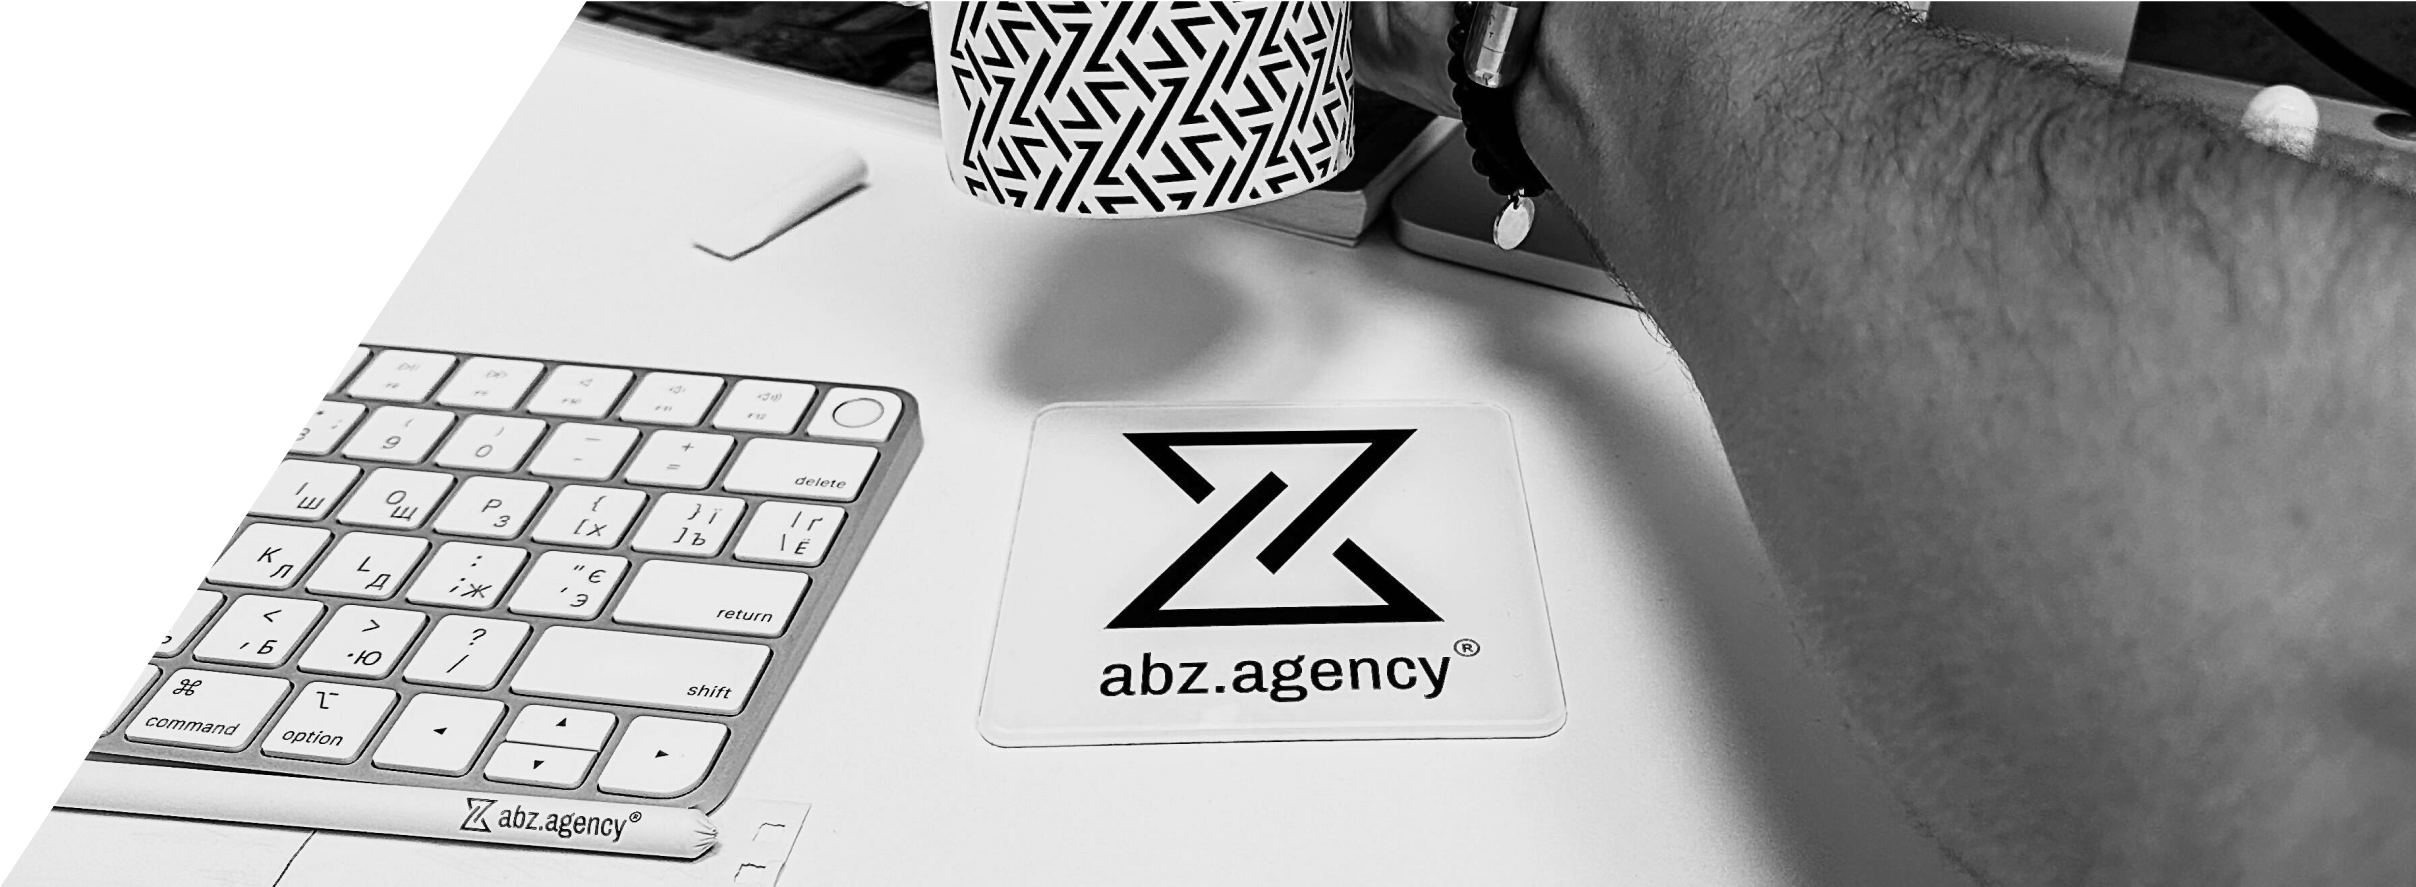 Coaster of abz.agency® in real life